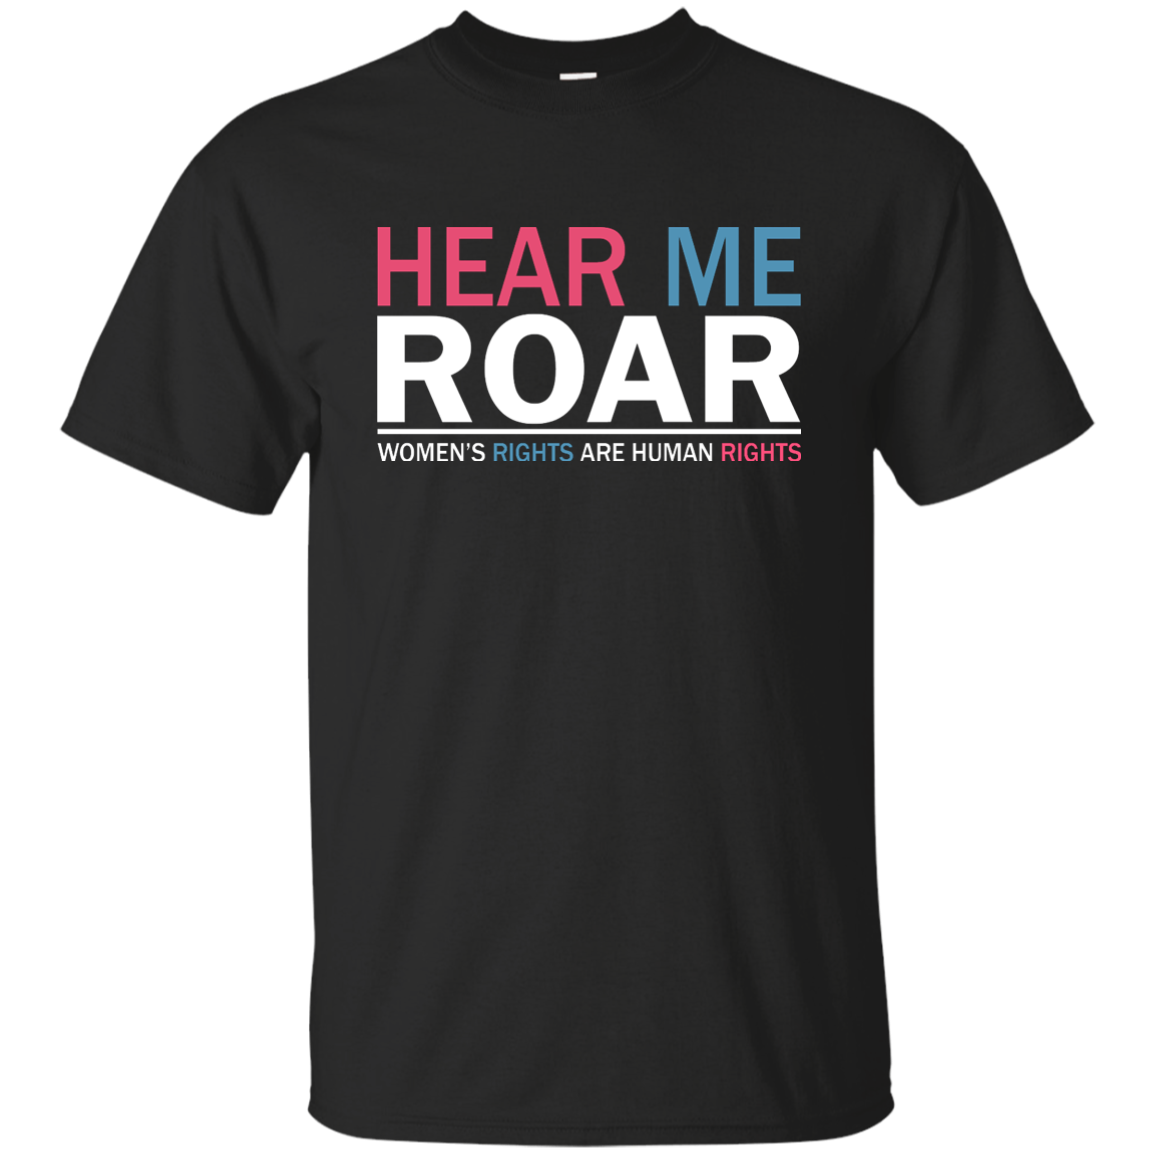 Hear me roar Women's rights are human rights shirt, hoodie, tank